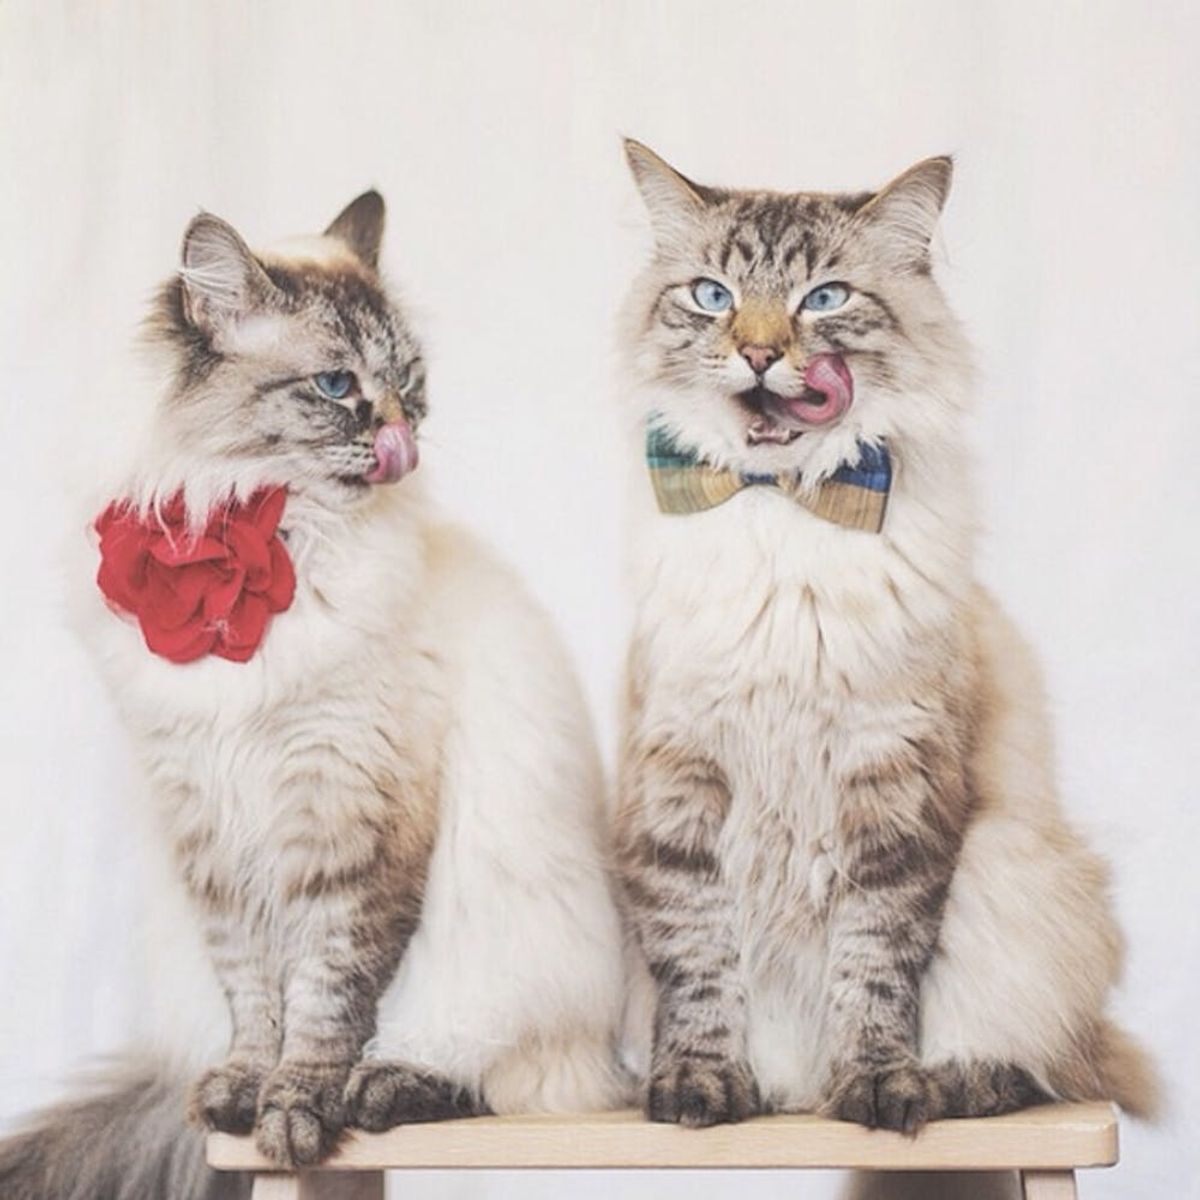 21 Instagram Cats We Want to Cuddle Right Meow